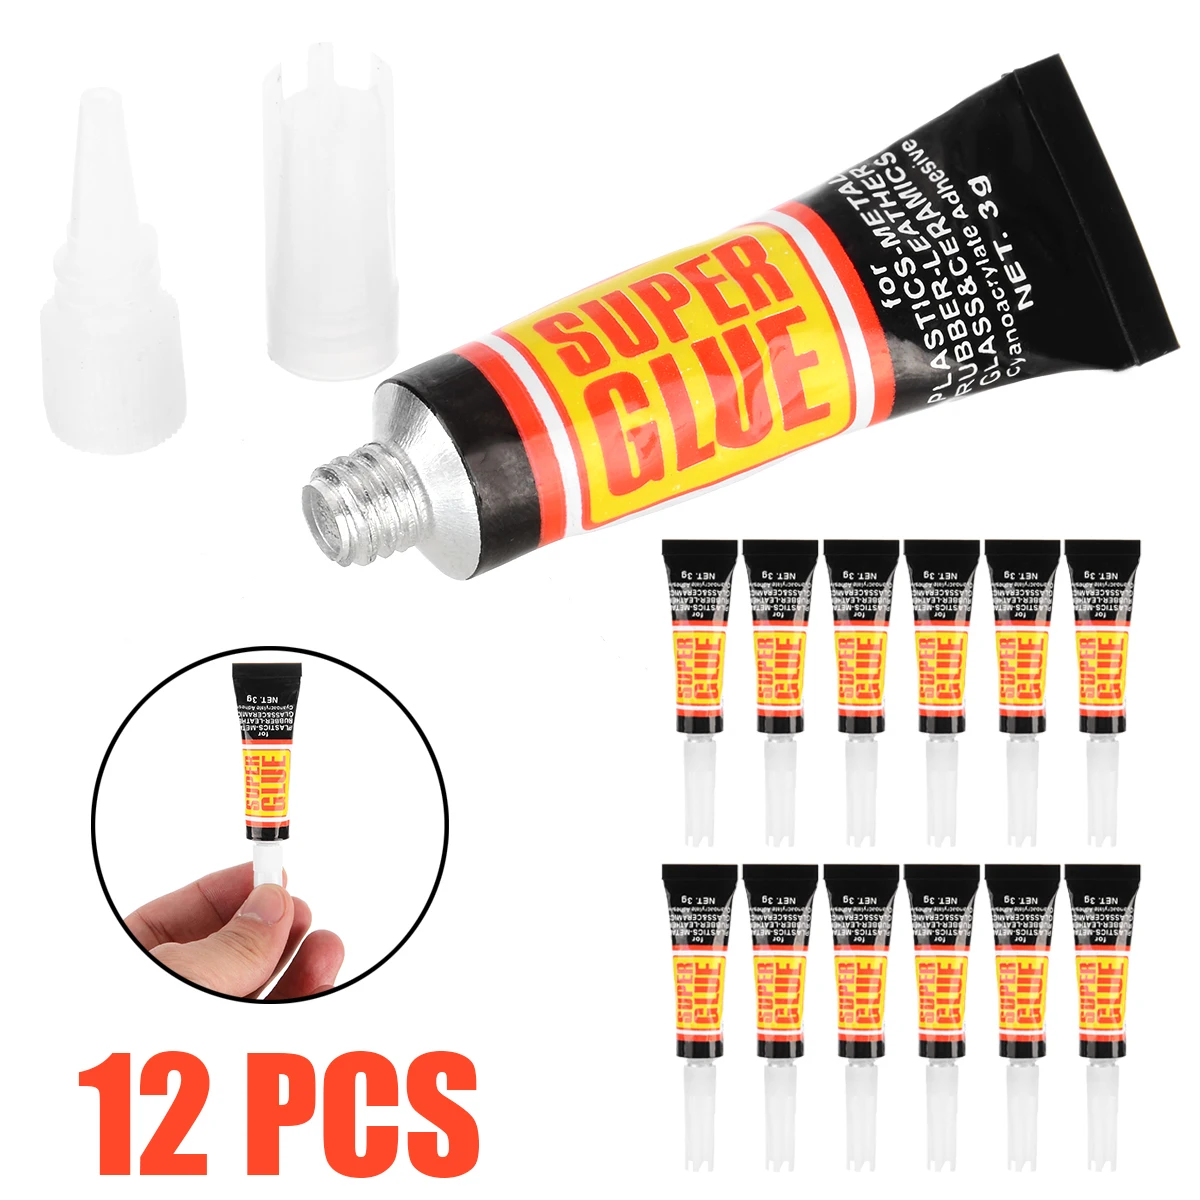 12Pcs Liquid Super Glue Surface Insensitive Strong Adhesive Fast Instant Glue Tool Wood Metal Glass Adhesive Stationery Repair